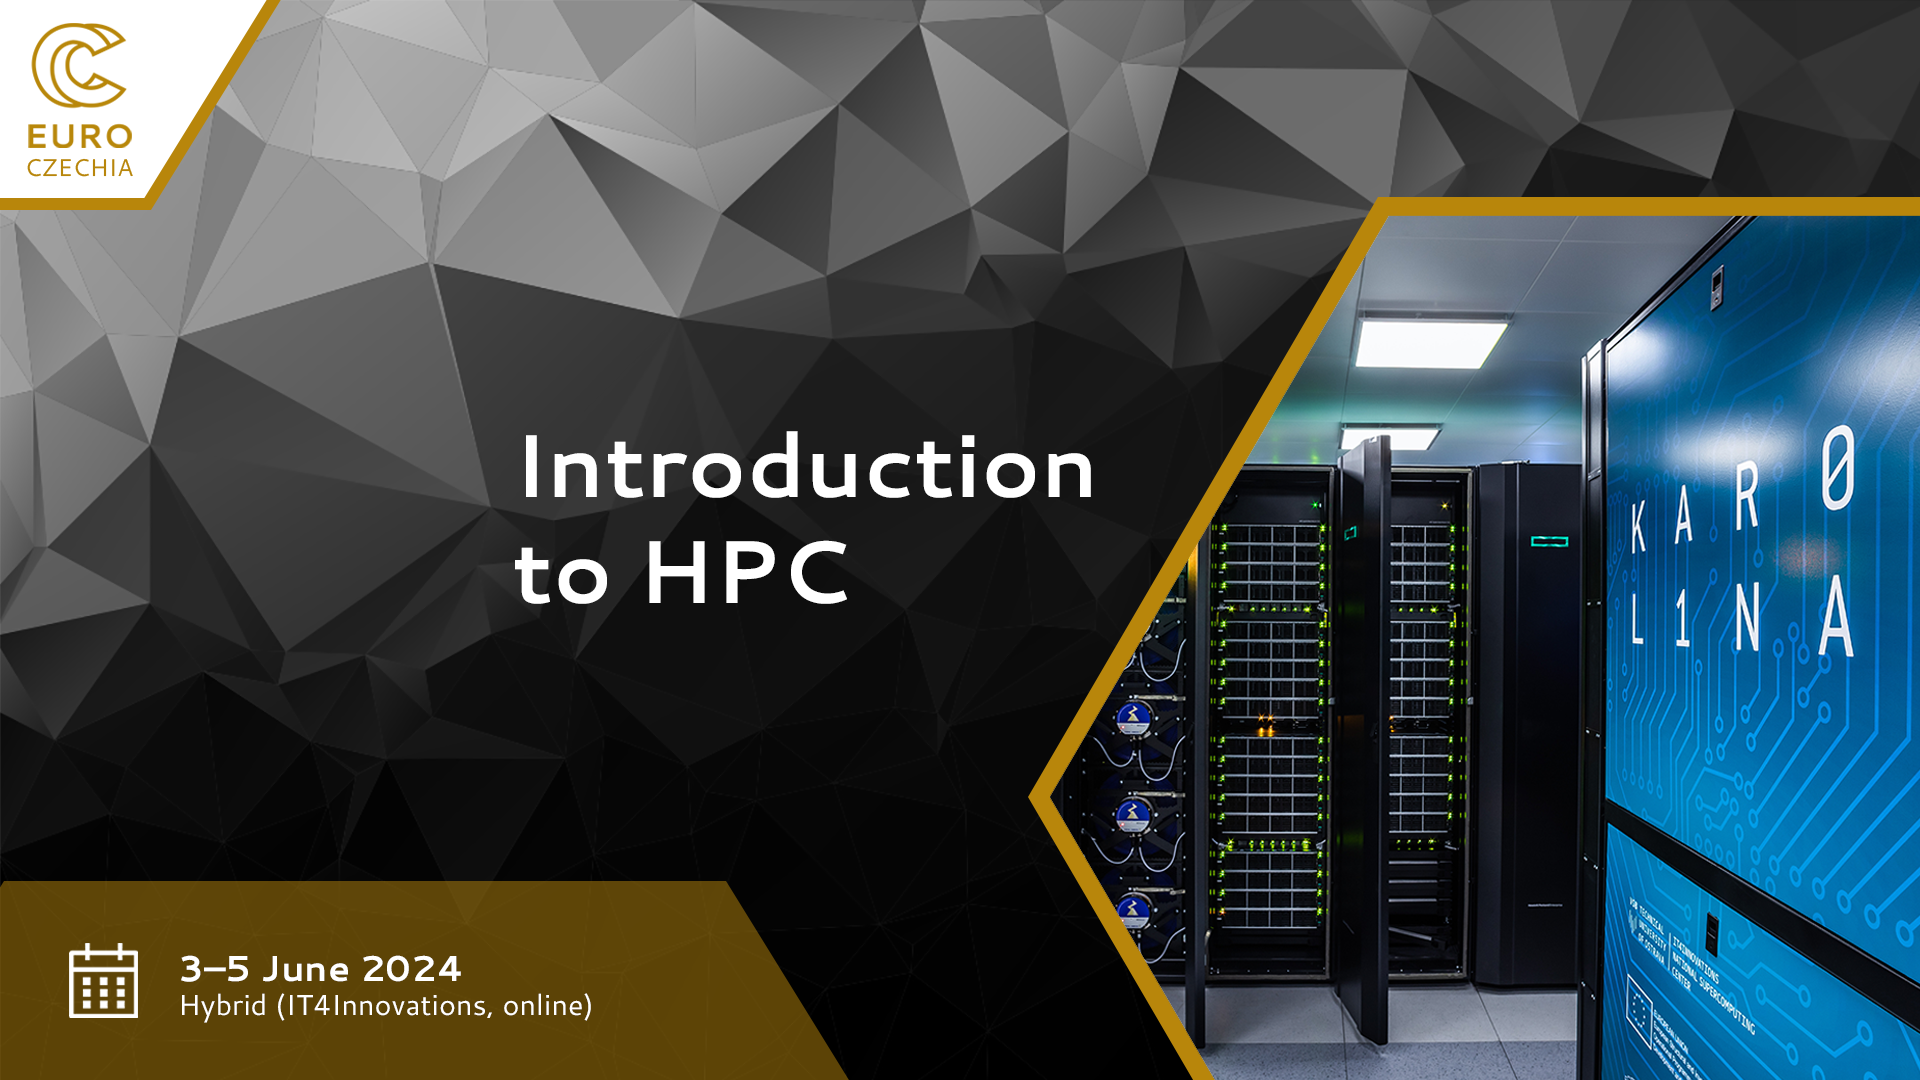 Banner_Introduction_to_HPC_1920x1080_WEB